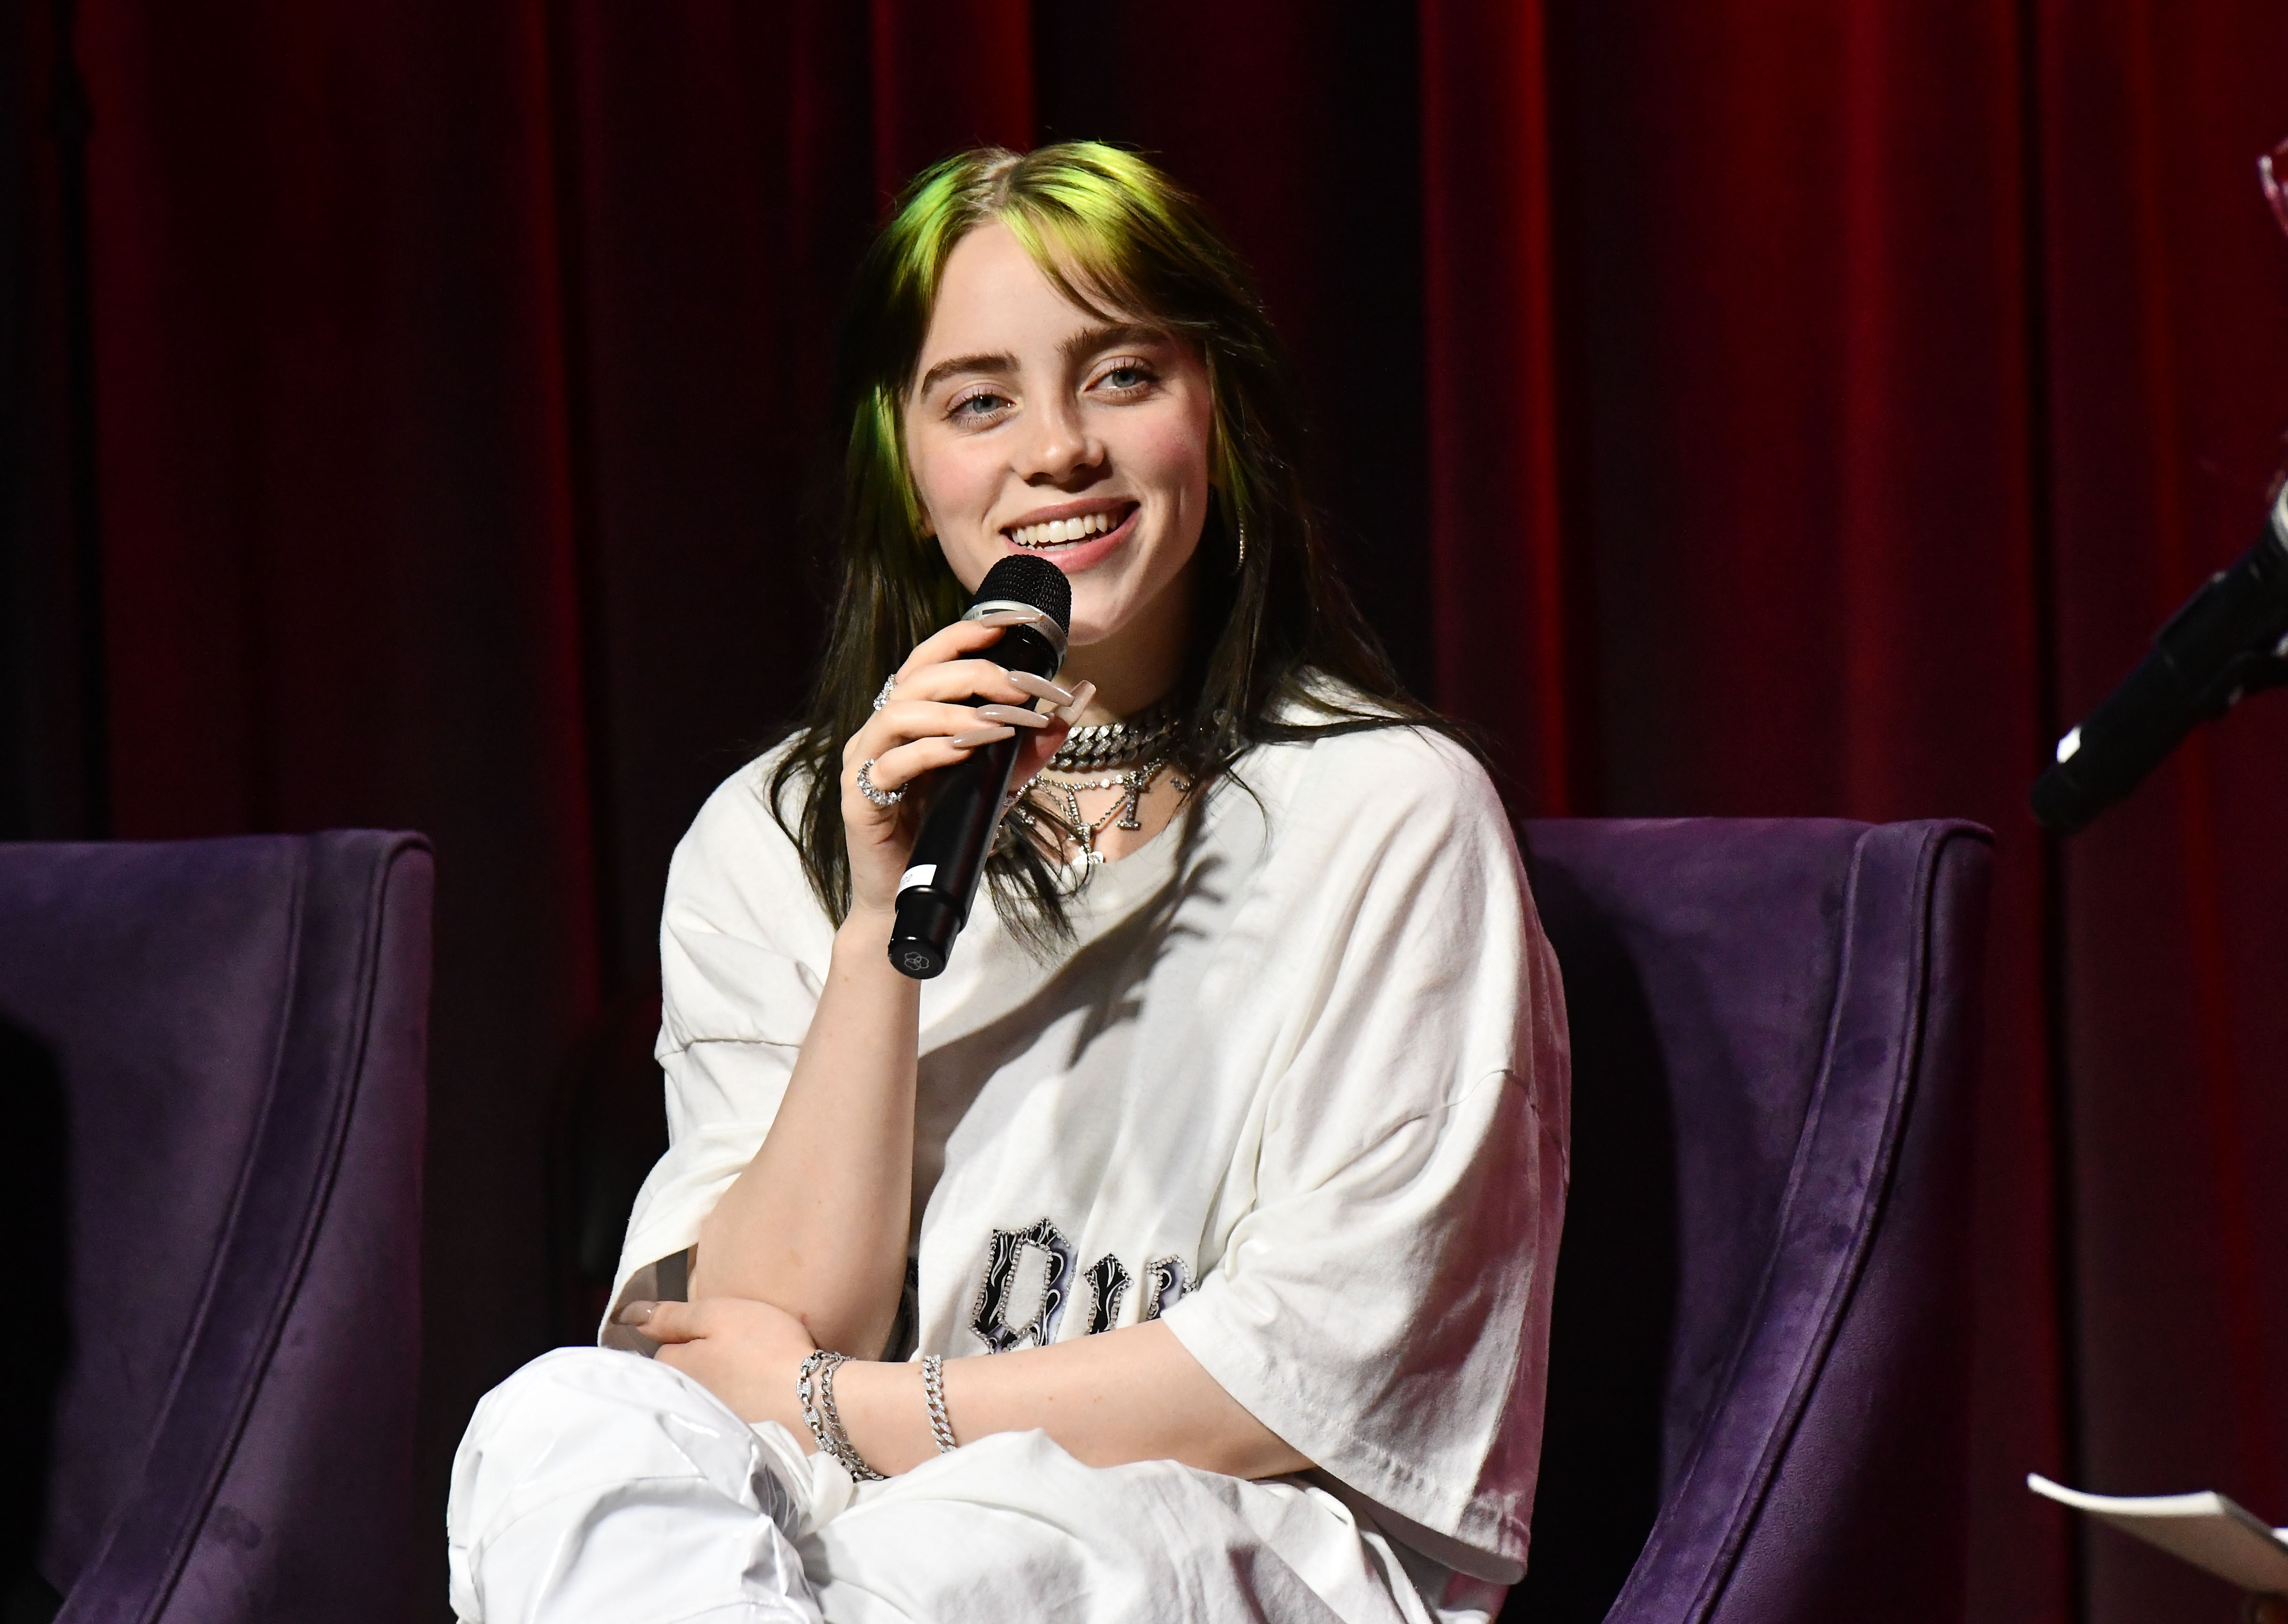 Singer Billie Eilish performs on stage at The GRAMMY Museum